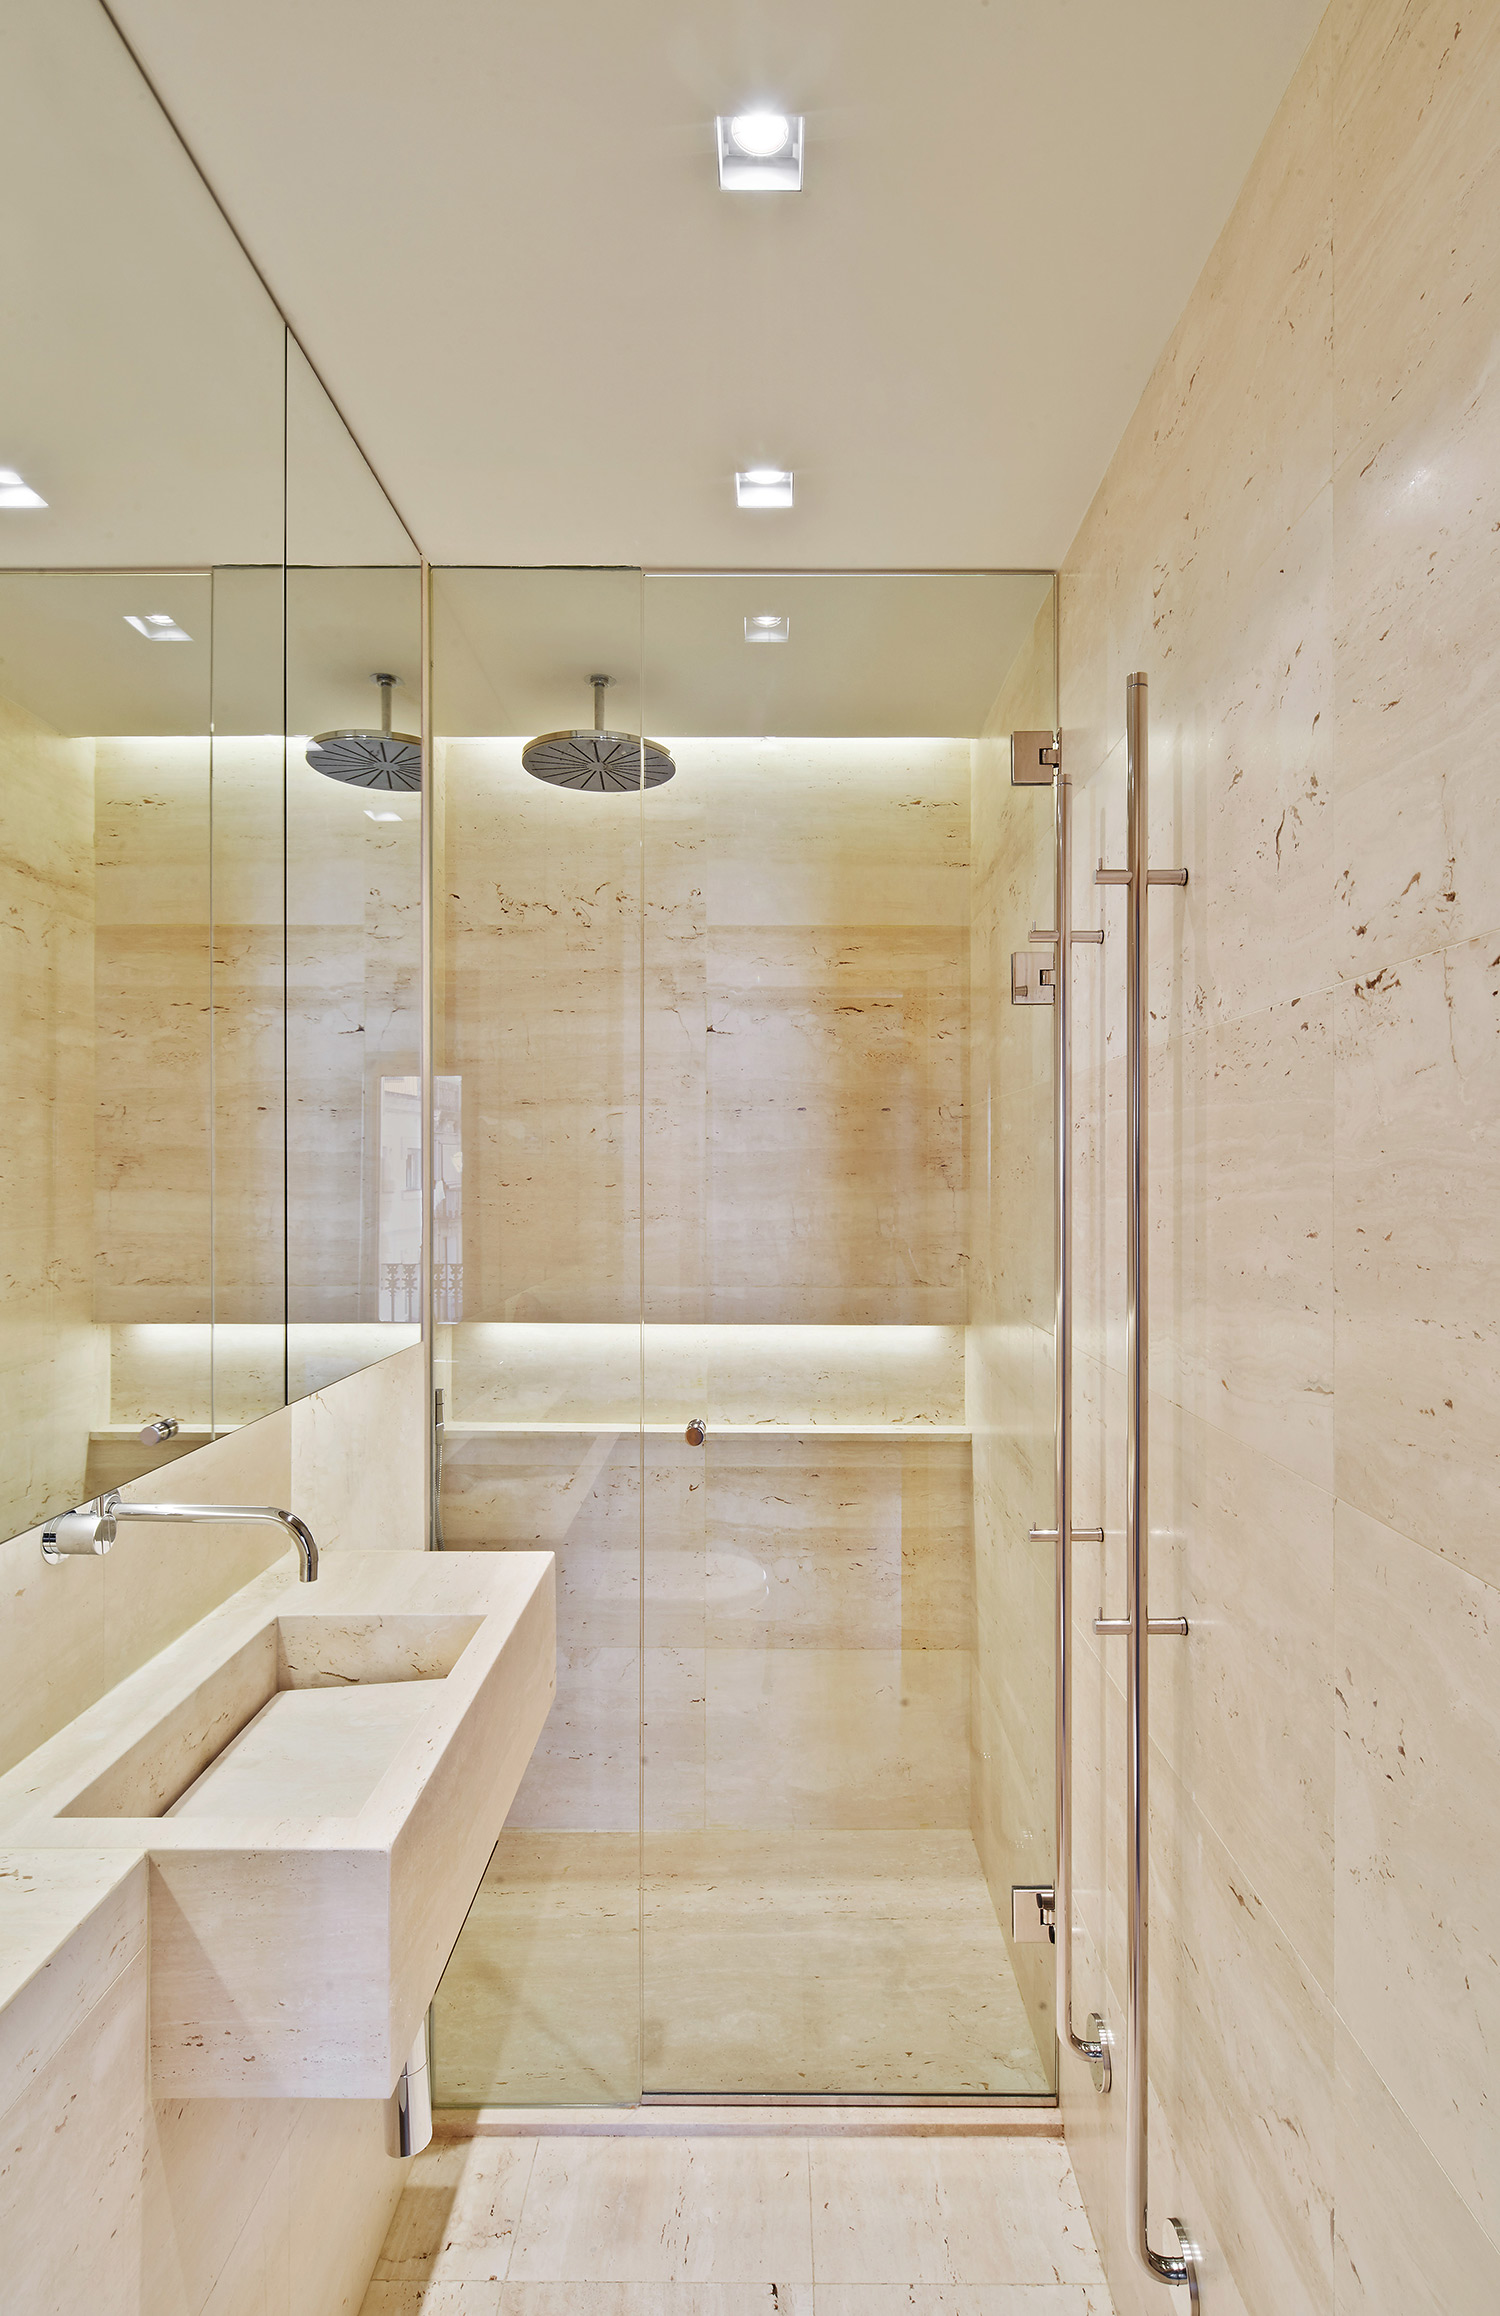 Barcelona apartment renovation with travertine stone bathroom and mirror cabinets